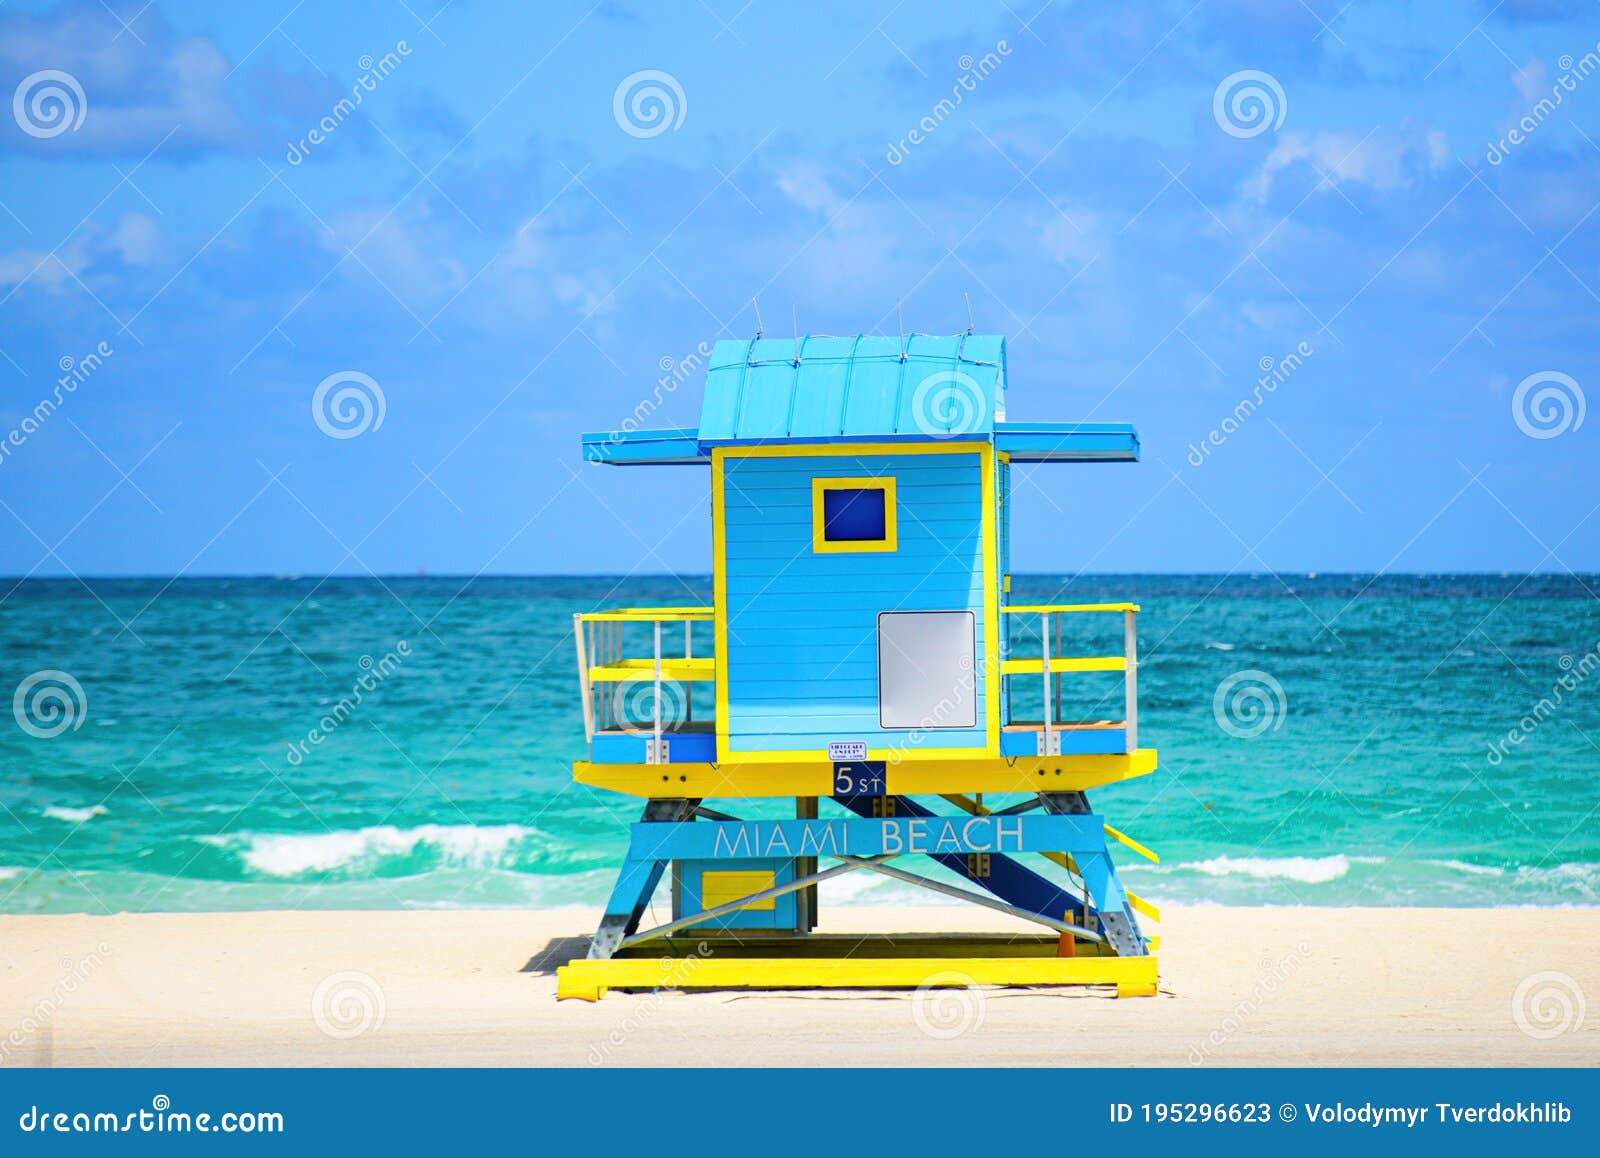 Miami South Beach skyline. Lifeguard tower in colorful Art Deco style and Atlantic Ocean at sunshine.